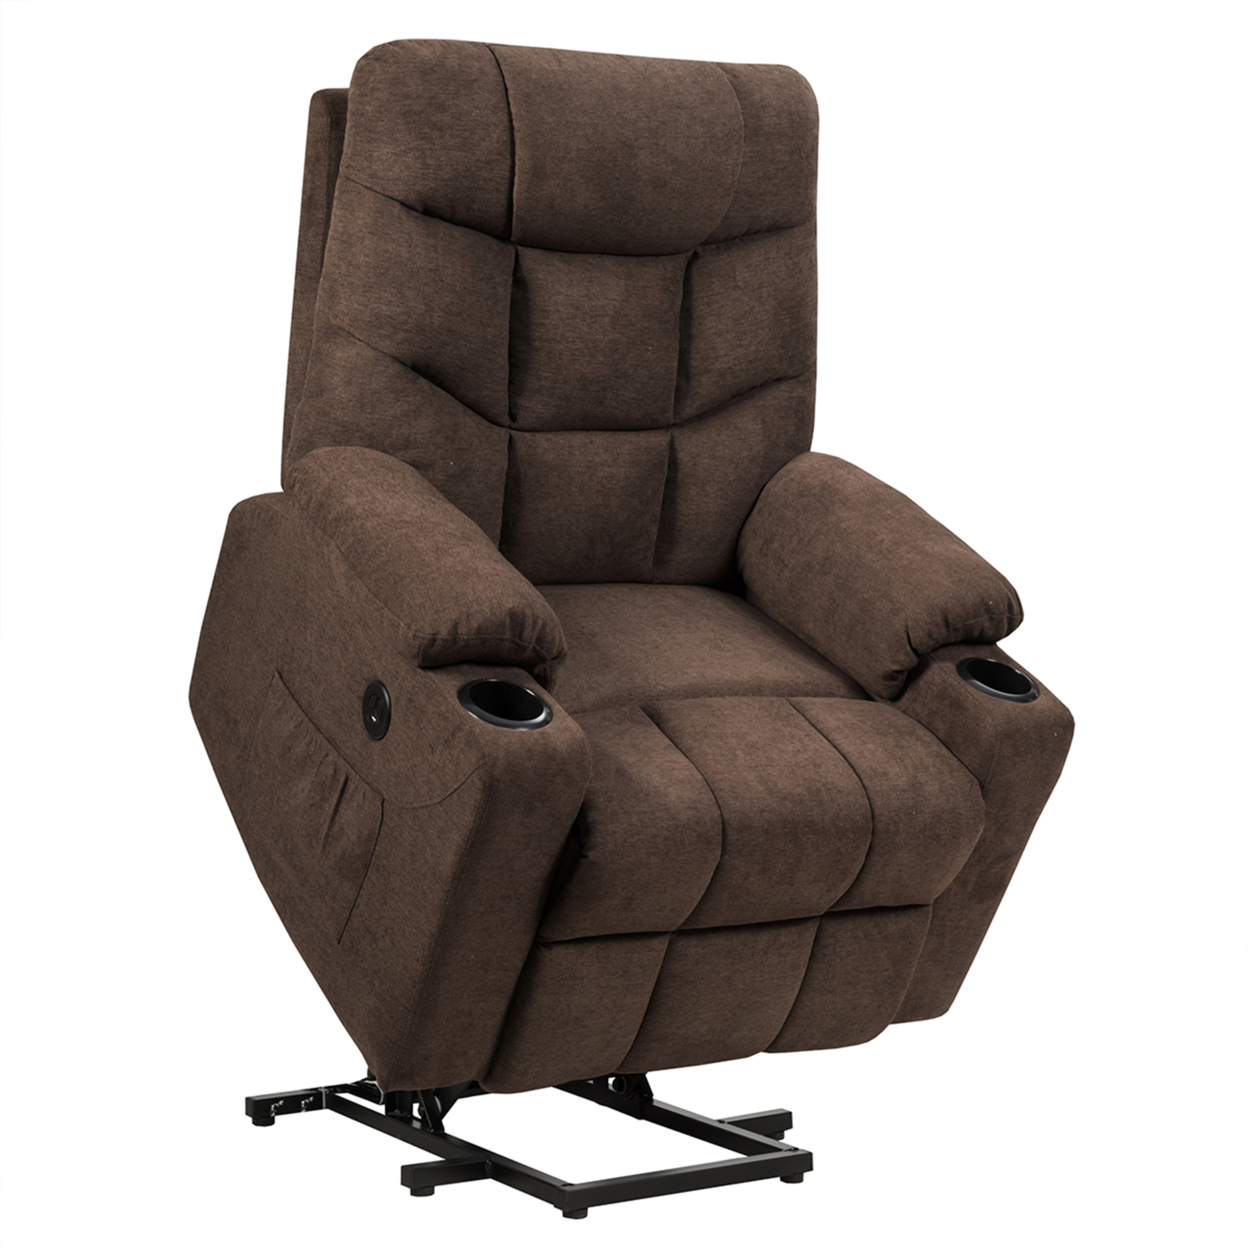 Power Lift Massage Recliner Fabric Sofa Chair W/ Remote Control - Brown